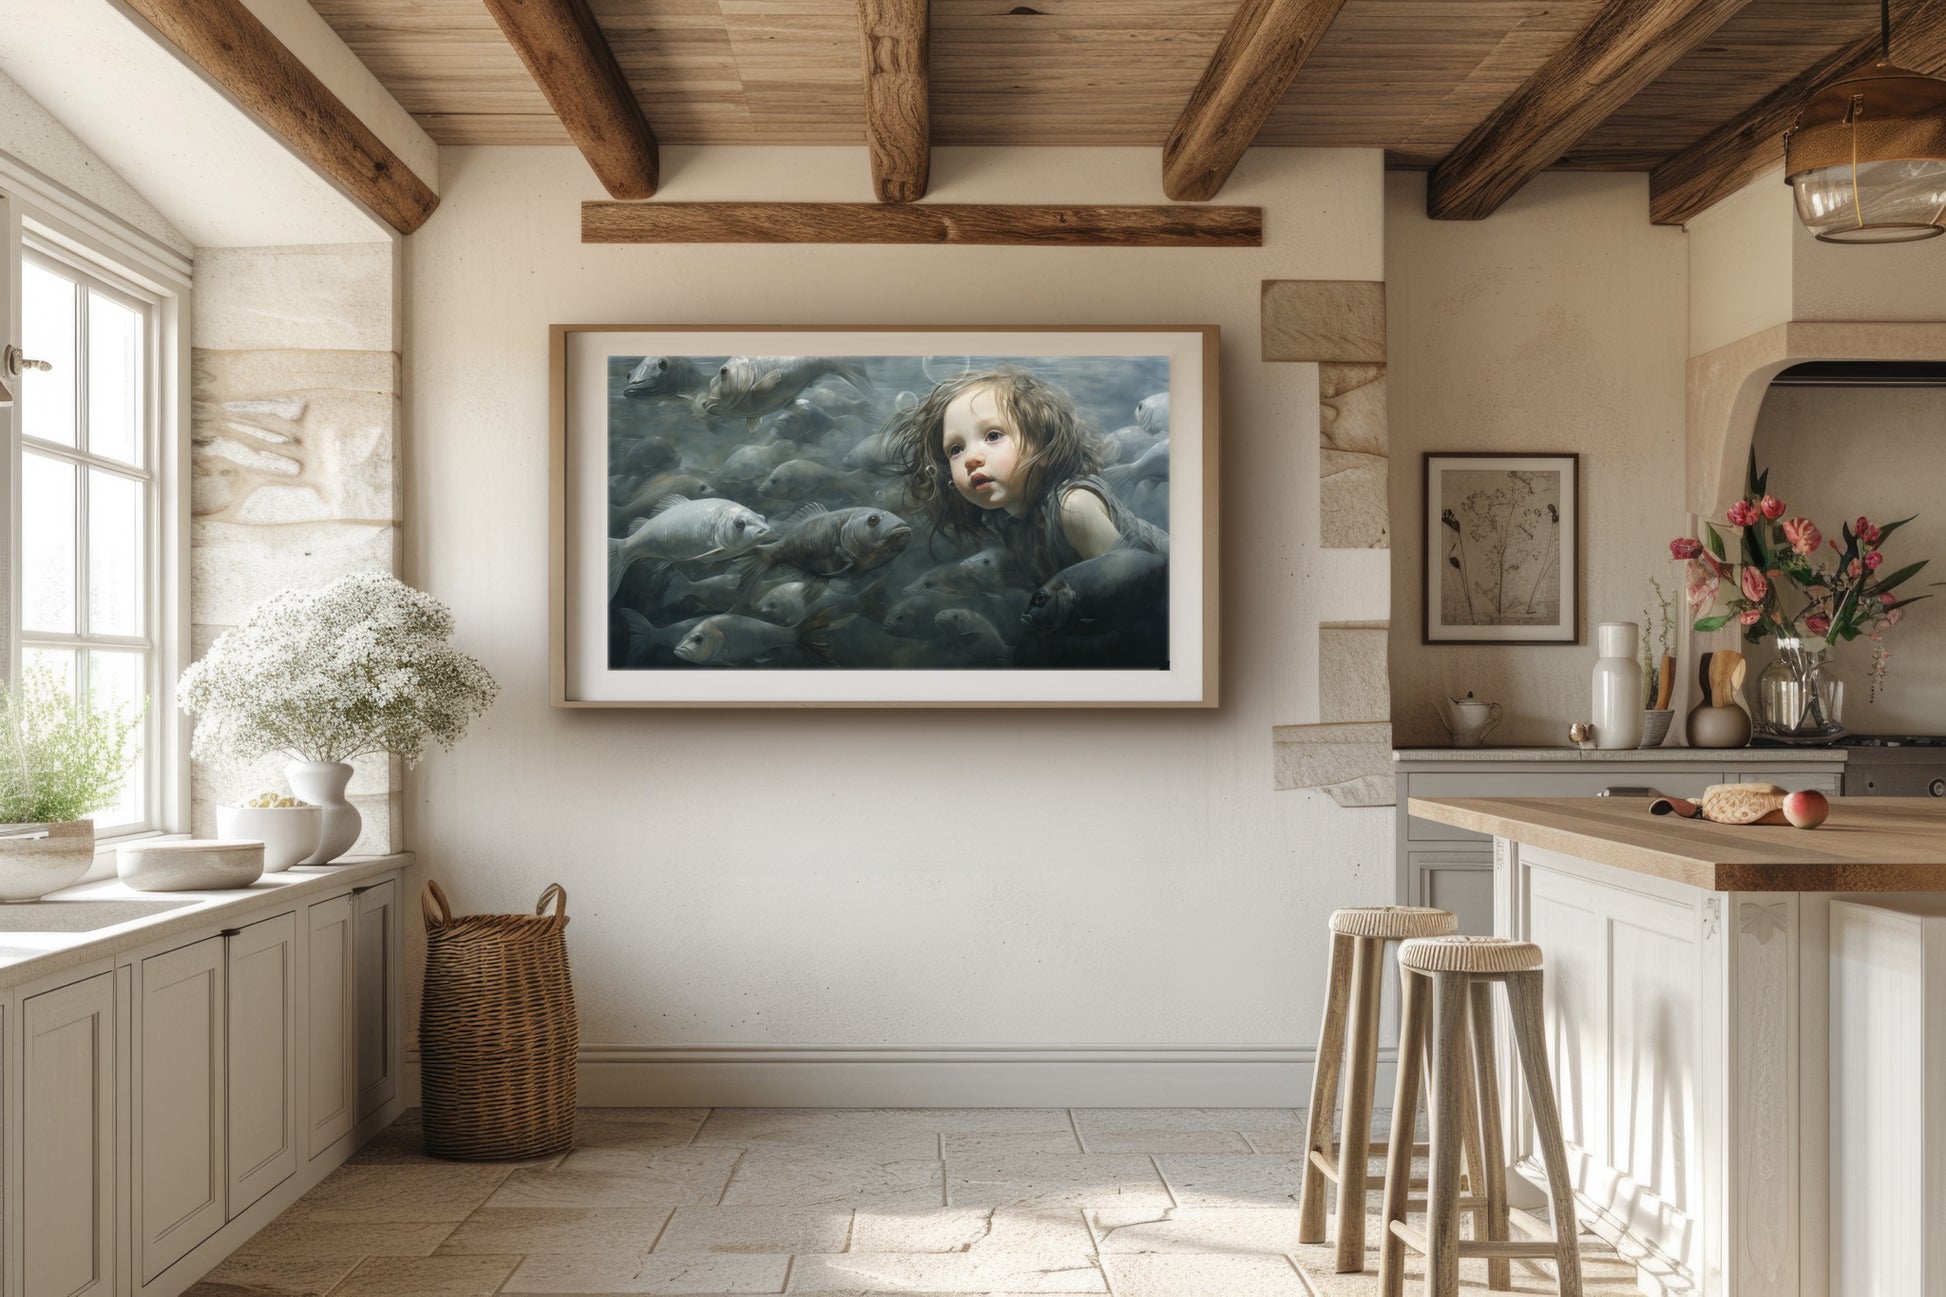 Artwork print featuring a young child underwater, enveloped by fish, creating a surreal and dreamlike visual. This fine art print is a captivating visual fable.